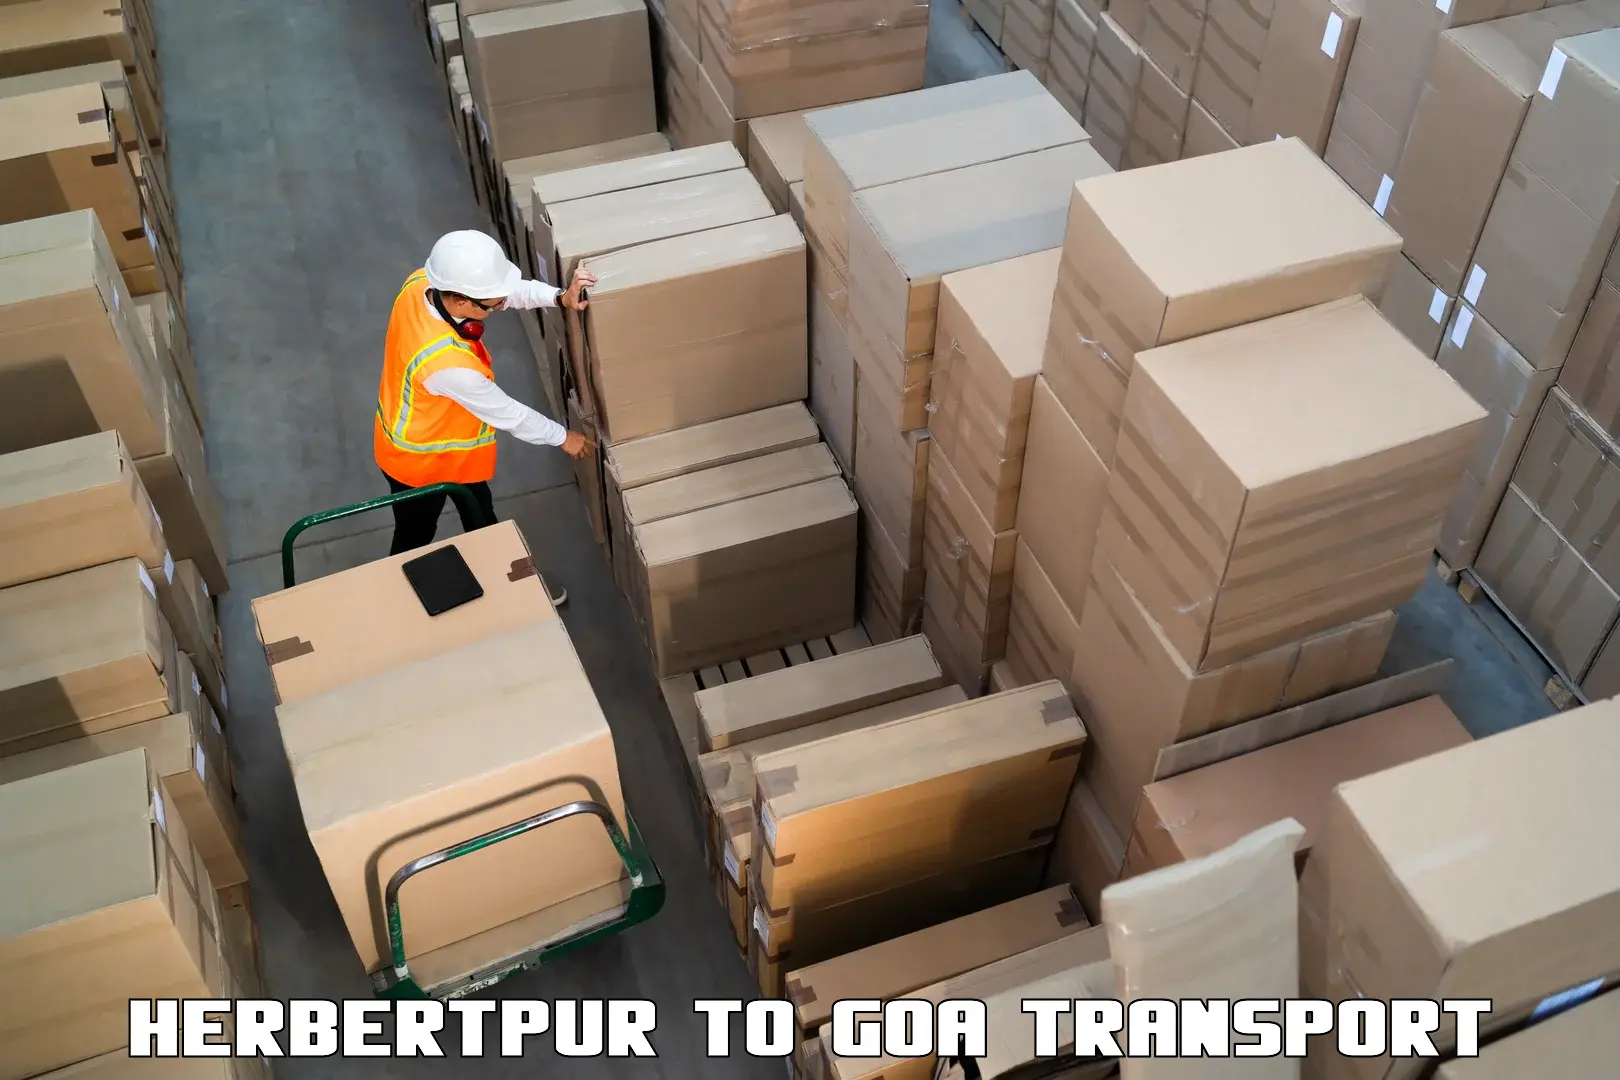 Goods delivery service Herbertpur to Bardez